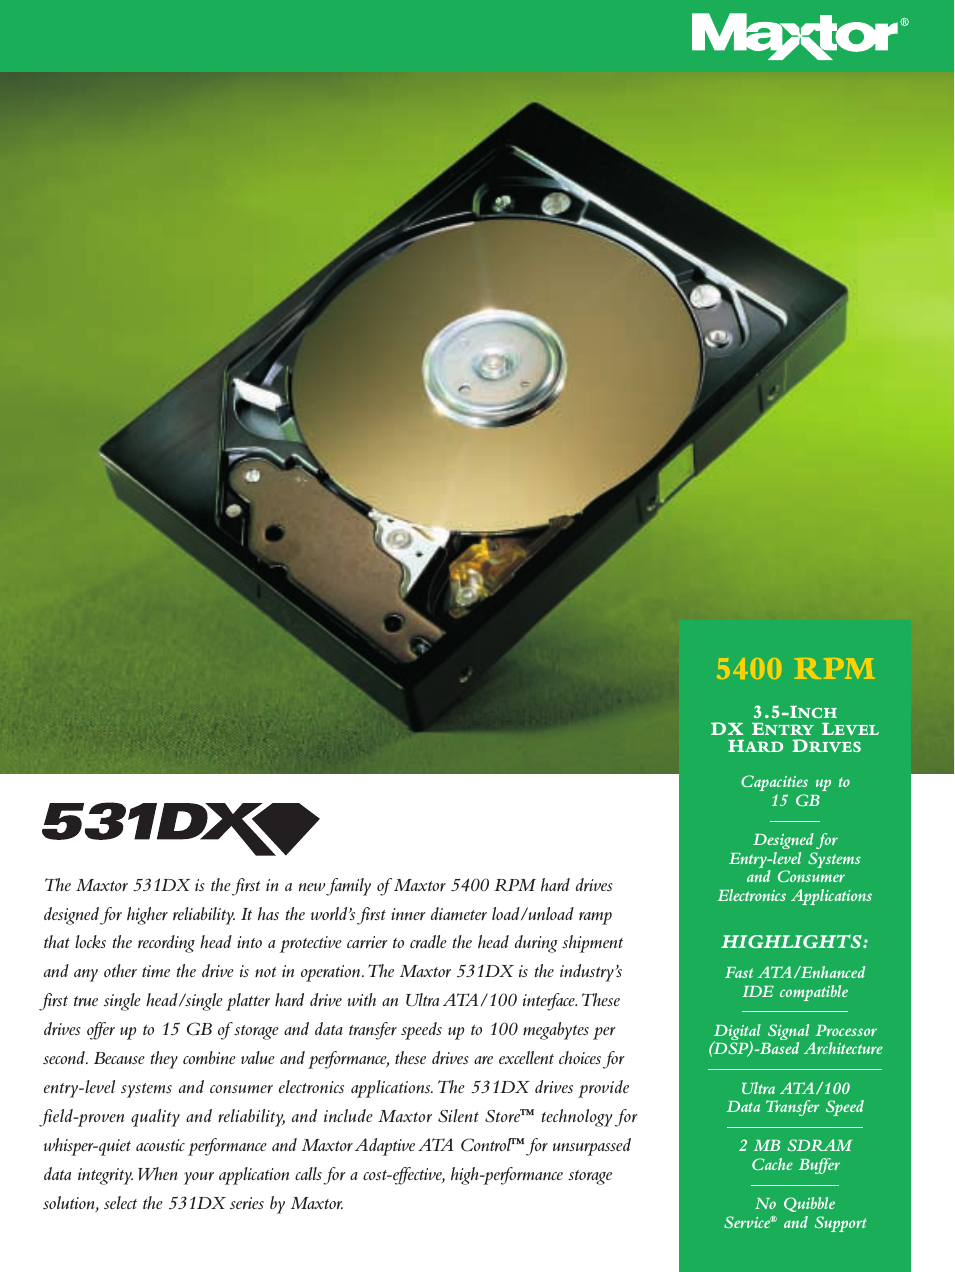 3.5-INCH DX Entry Level Hard Drive 531DX